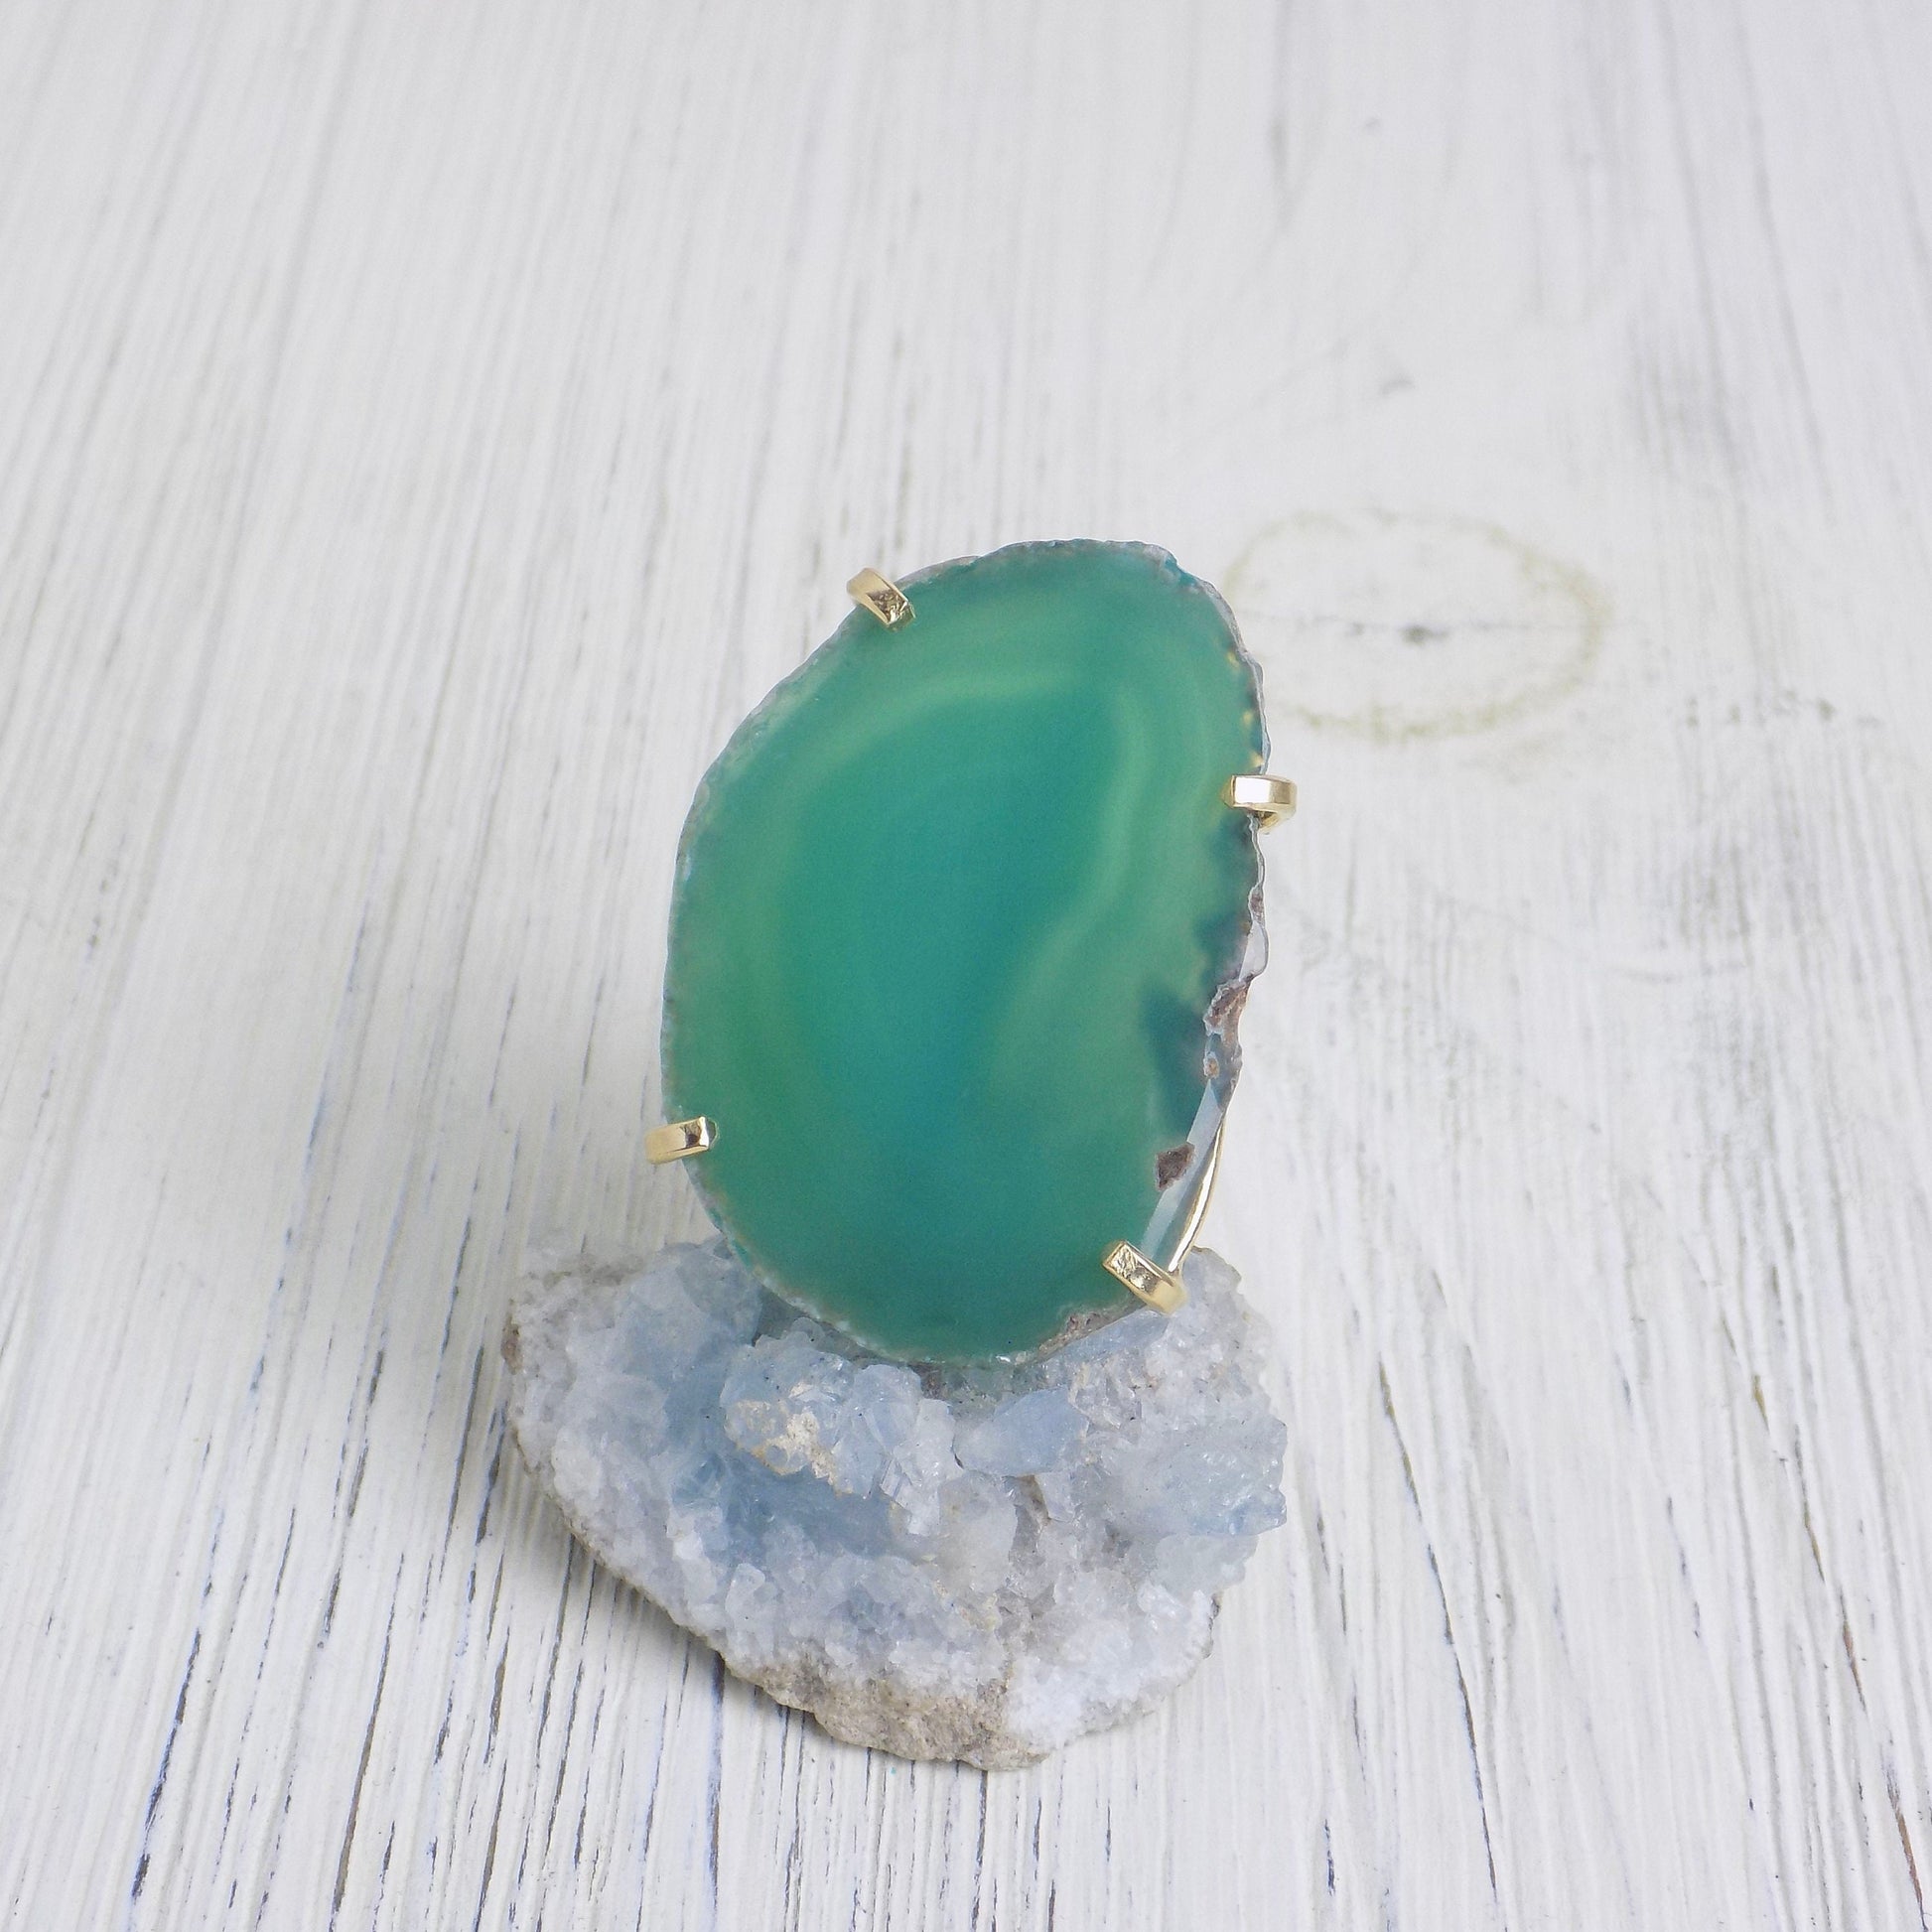 Emerald Green Large Agate Slice Gemstone Ring, Boho Statement Raw Crystal Ring Adjustable Gold Dipped, G13-391